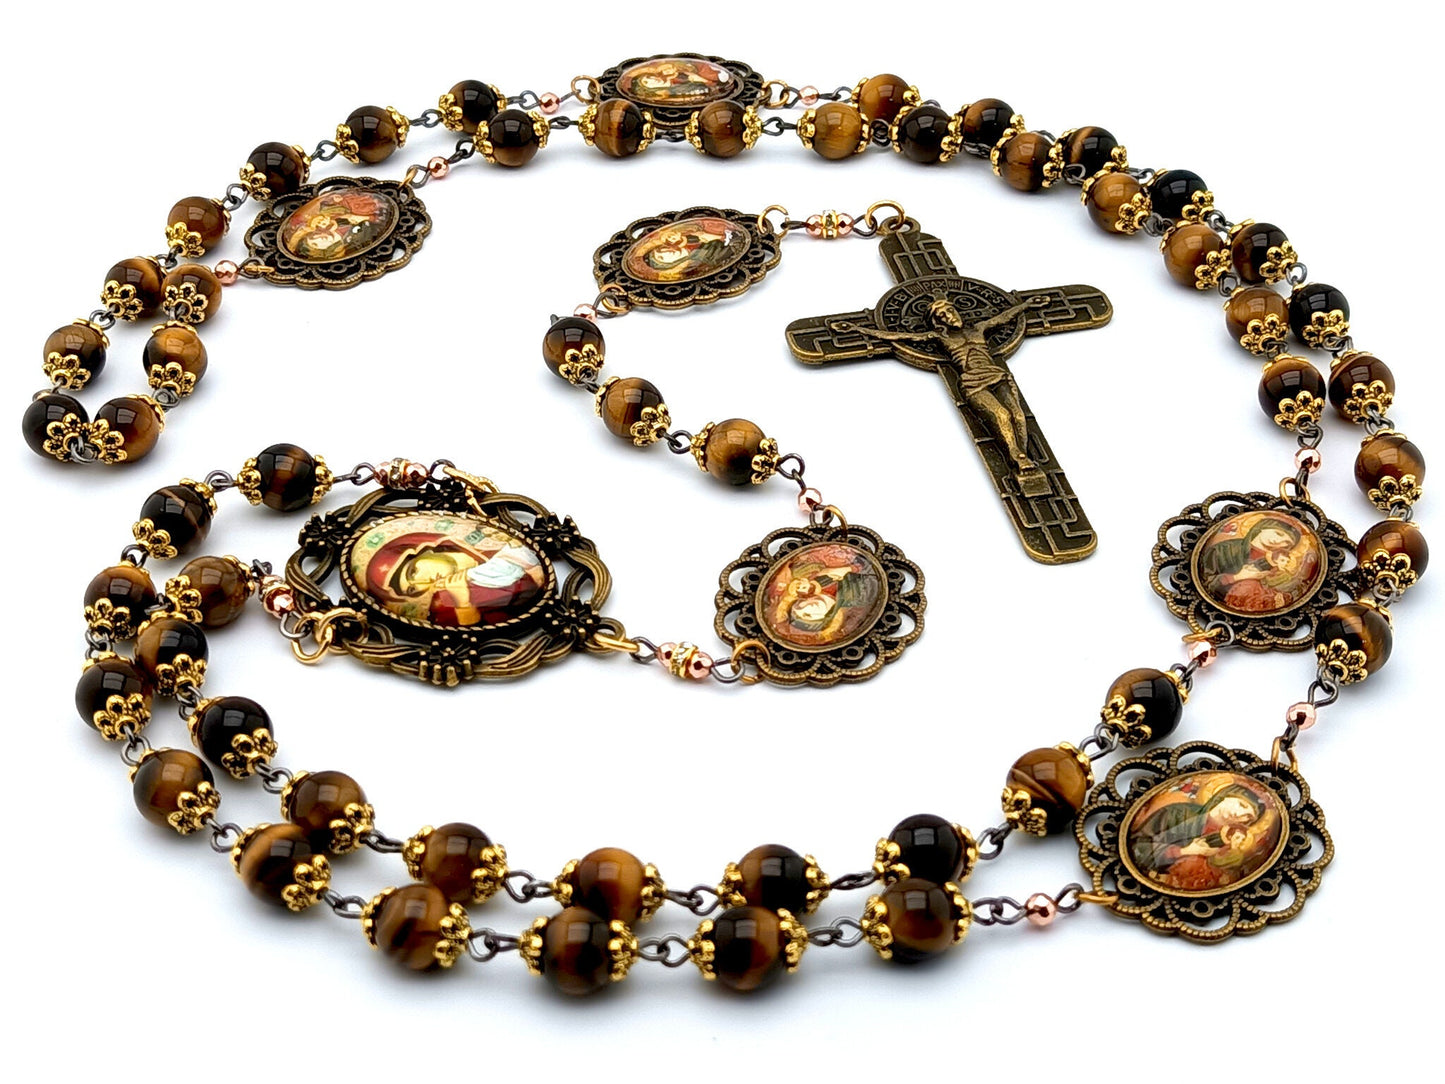 Our Lady of Perpetual Help unique rosary beads with tigers eye gemstone beads, picture medal pater beads, bronze crucifix and picture centre medal.